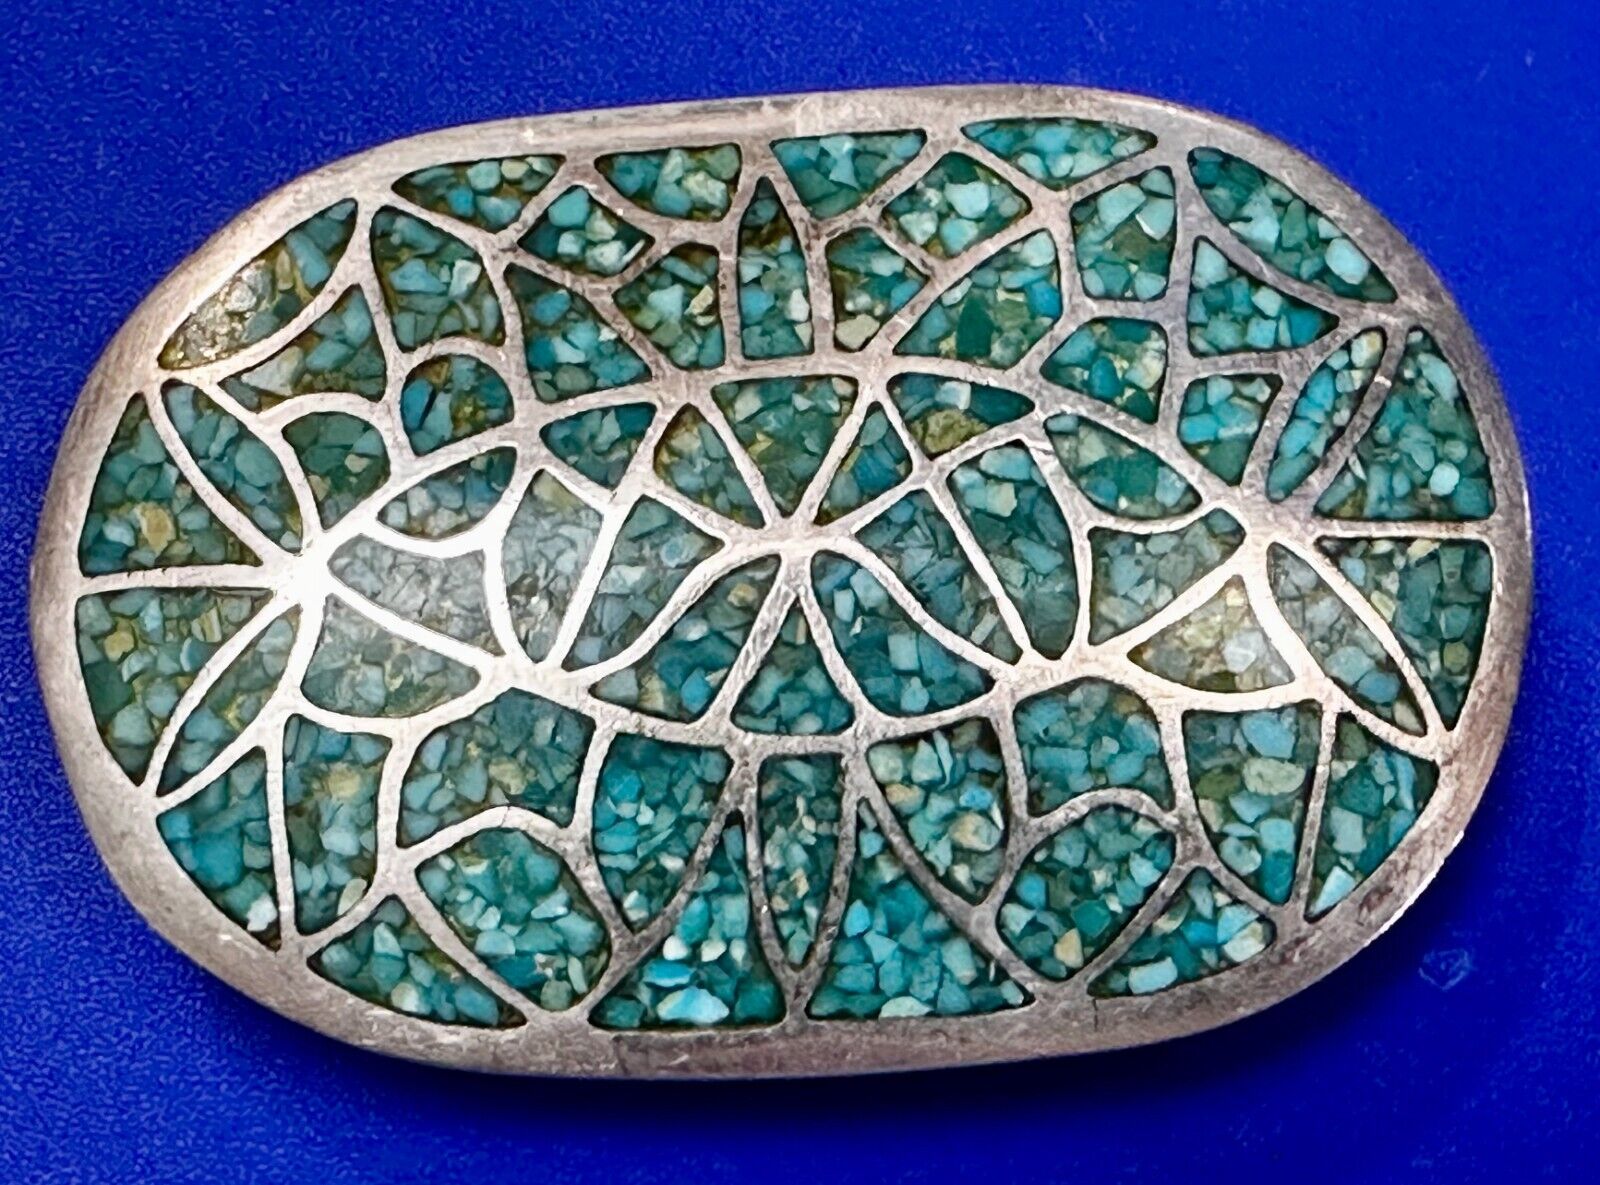 Beautiful Turquoise Stone Chip Inlay Native American Indian Art Belt Buckle